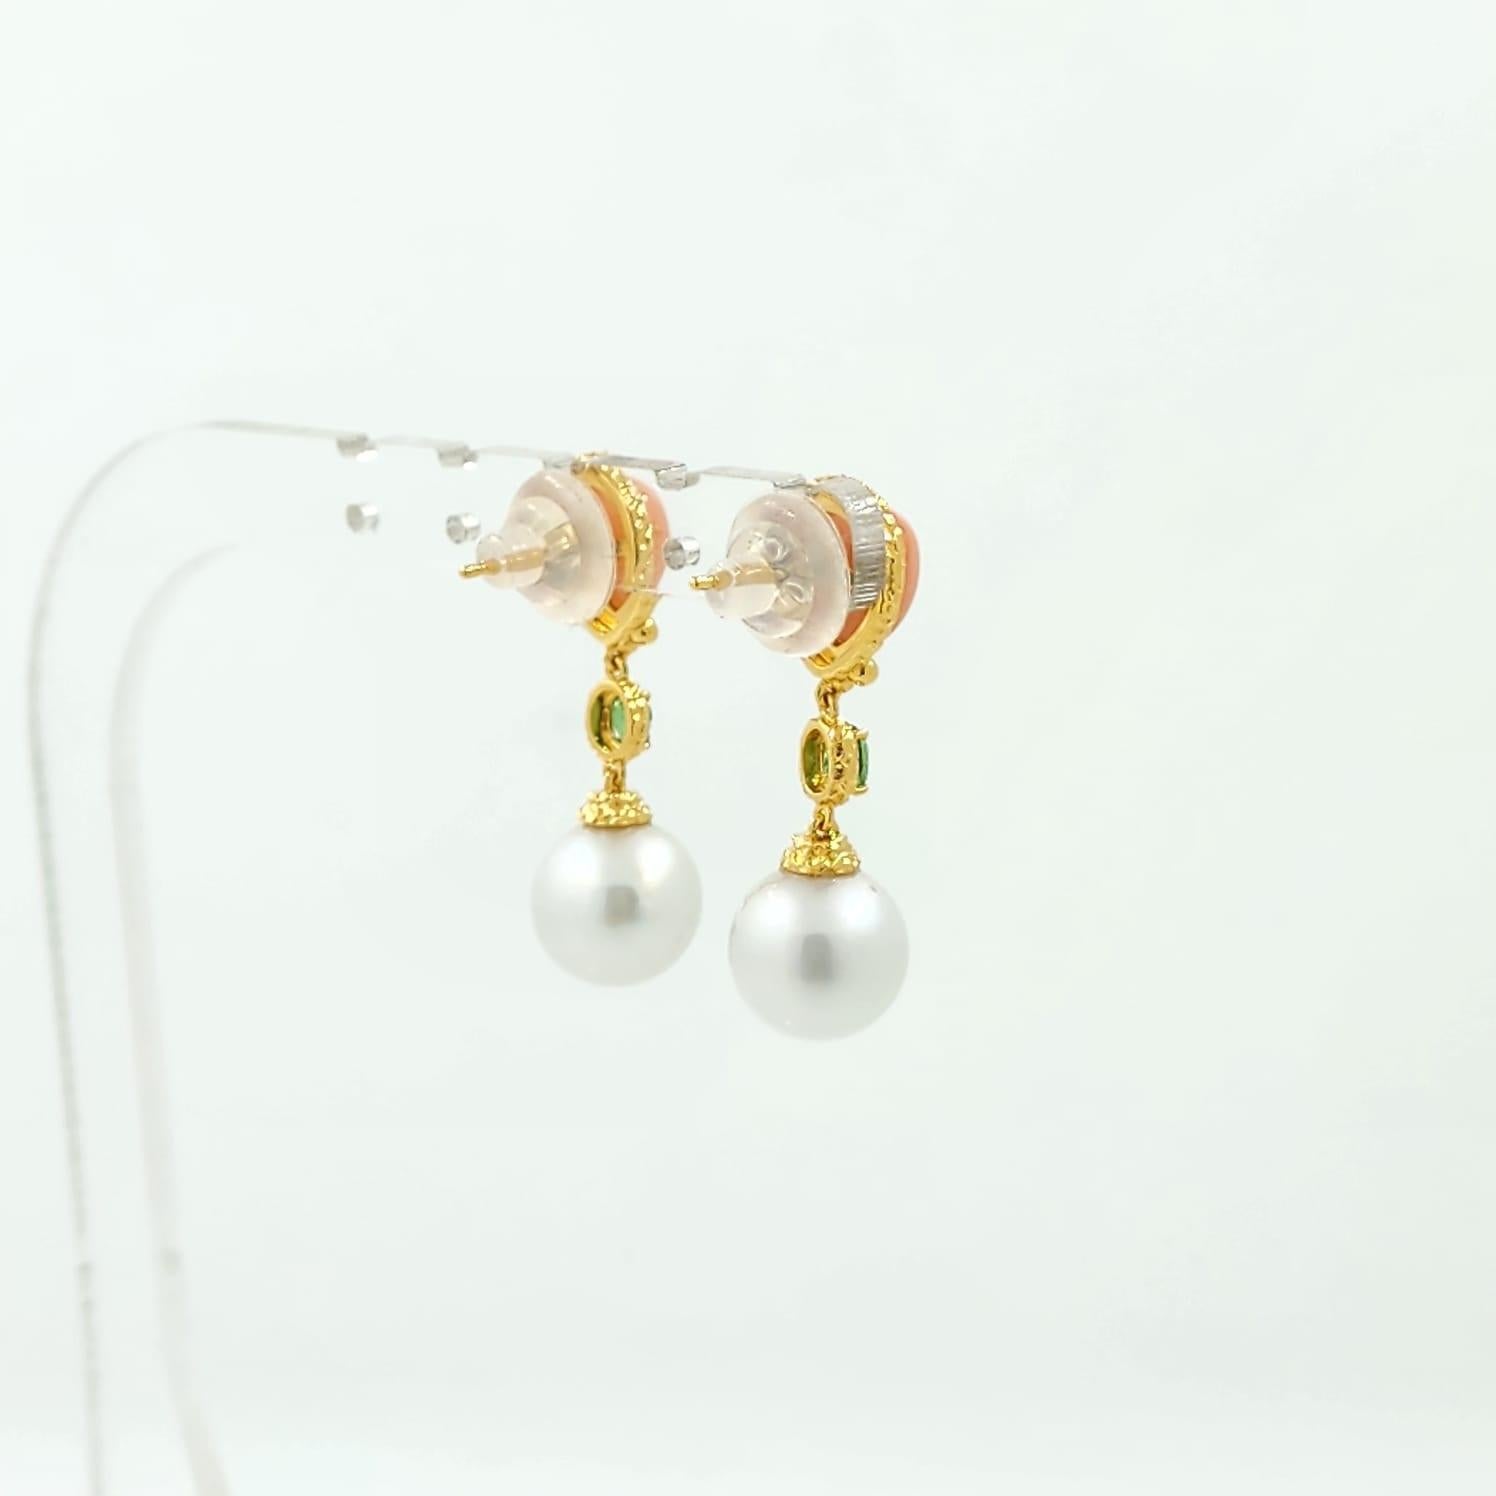 Bead South Sea Pearl Coral Drop Earrings in 18K Gold Vermeil Sterling Silver For Sale